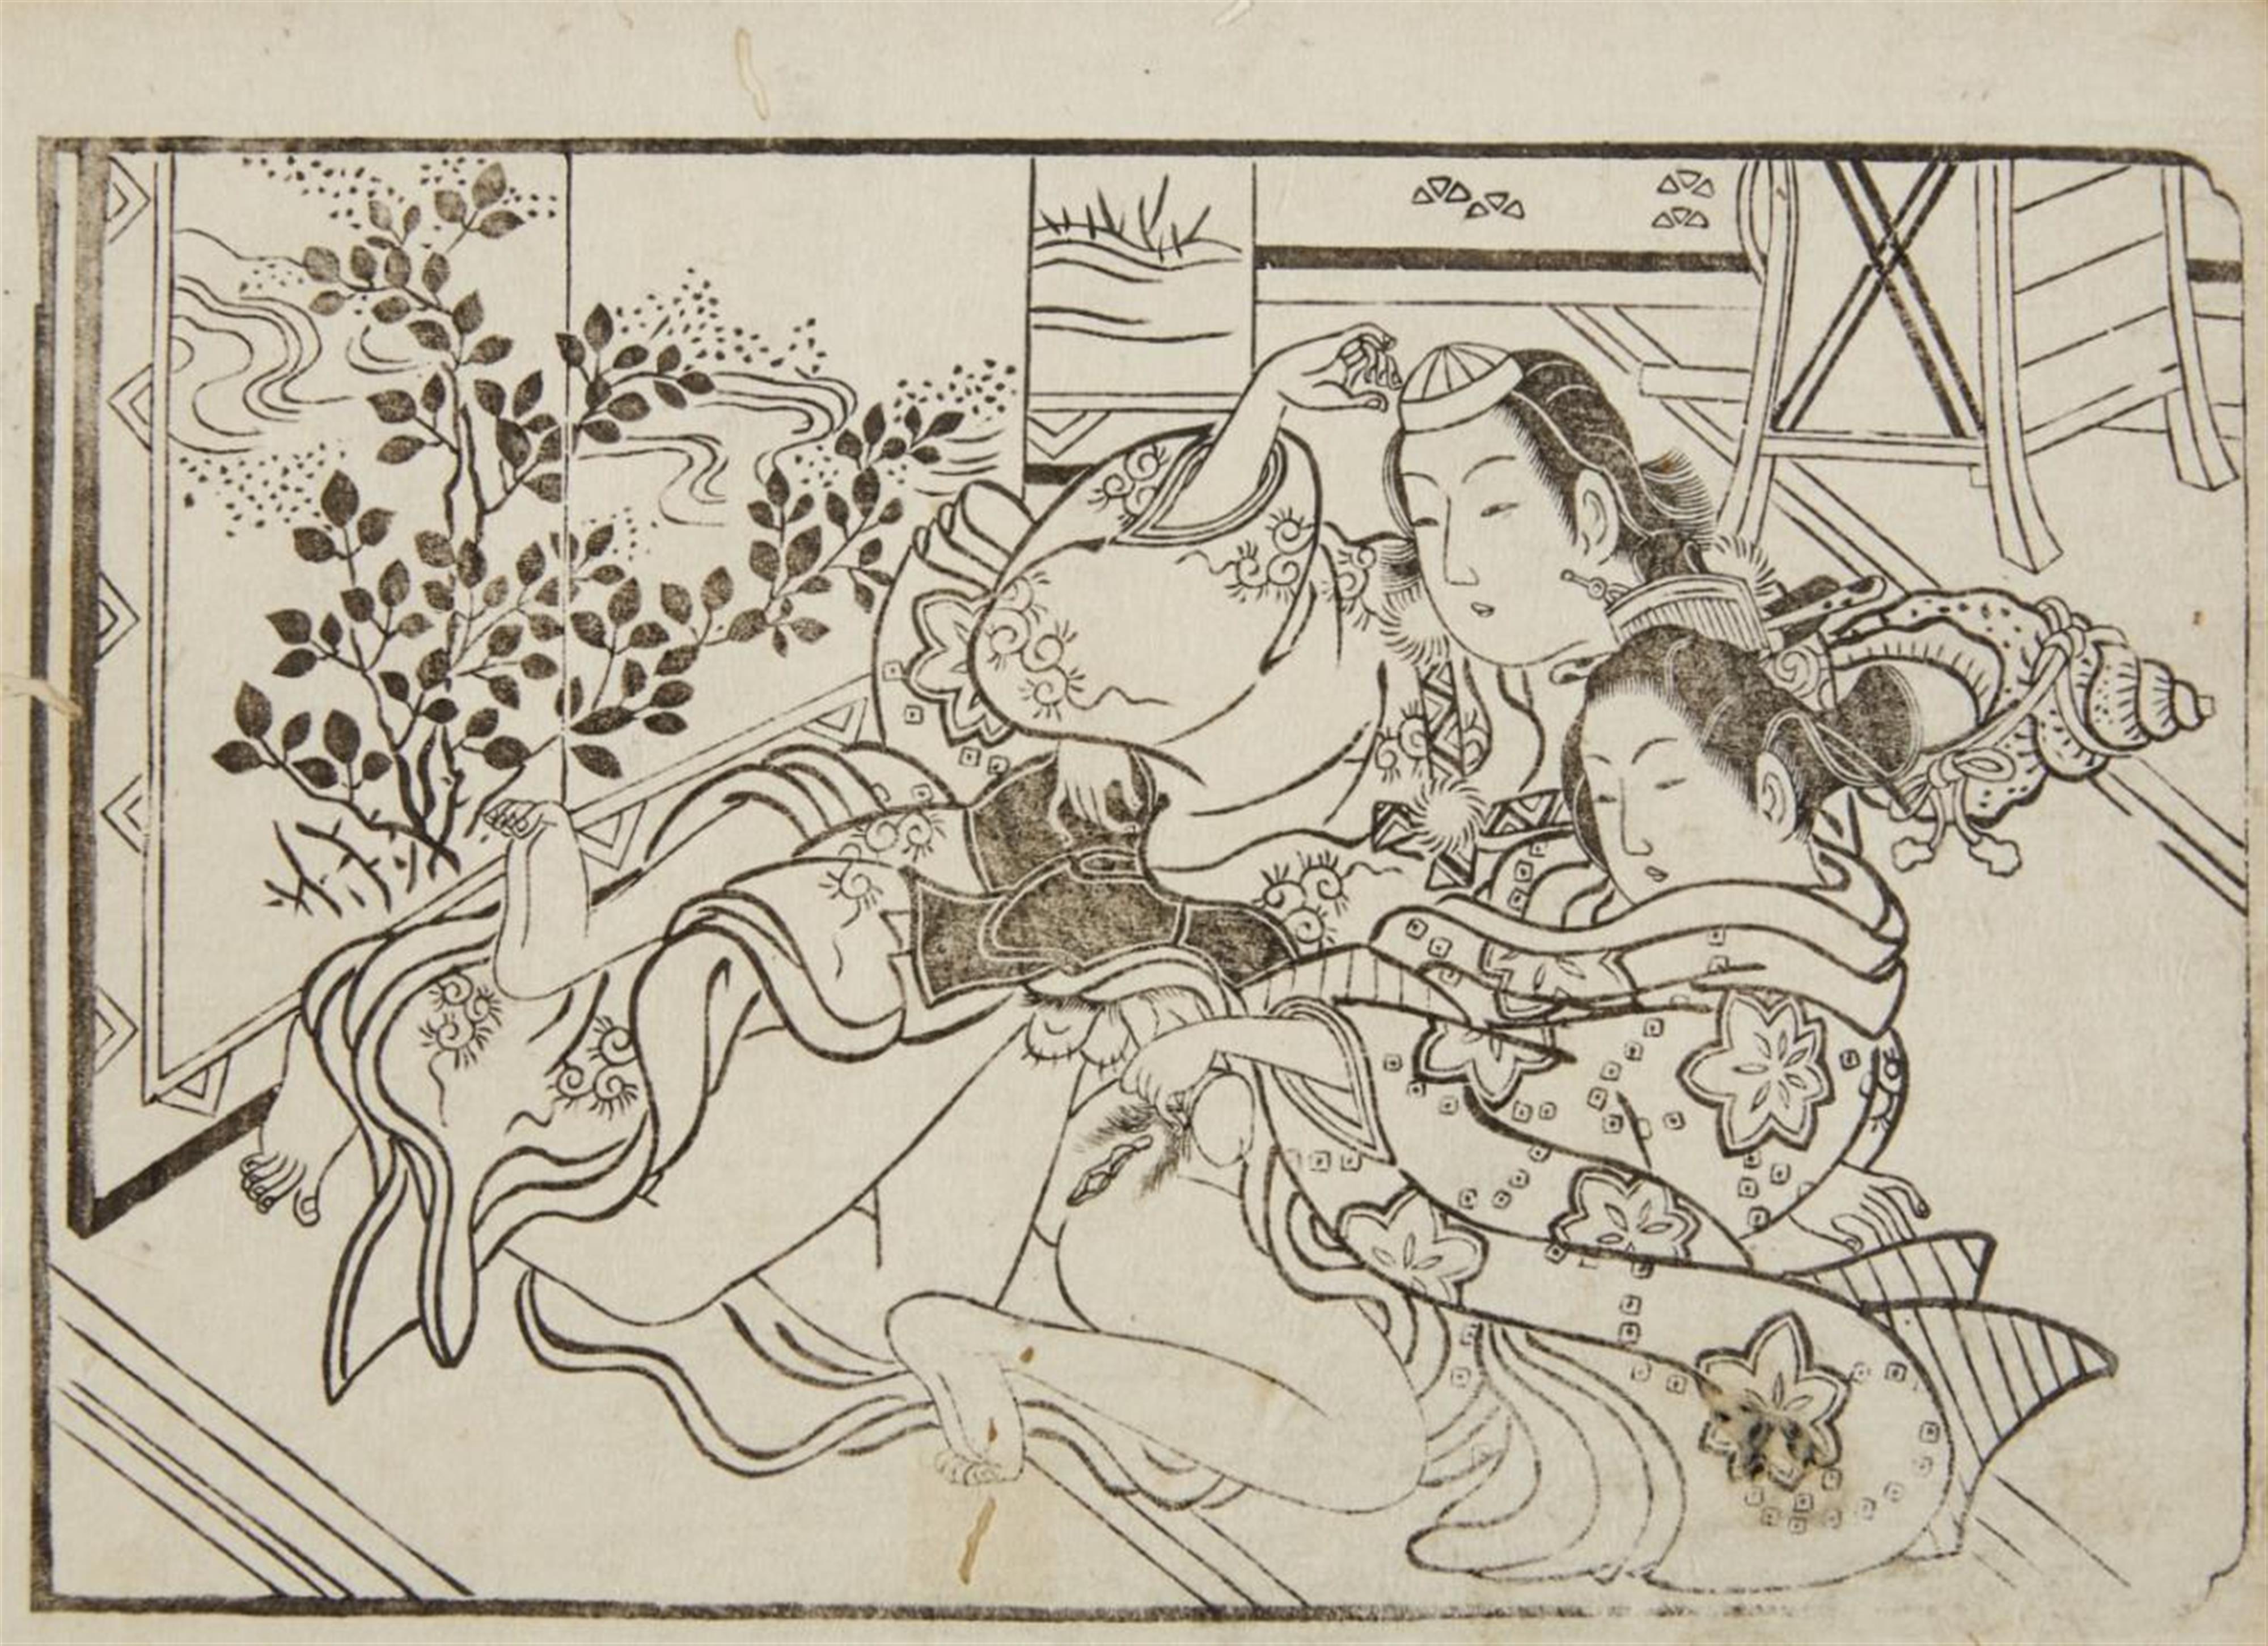 Kitagawa Utamaro
Various Artists of the 18th and 19th centuries - a) Oban, yoko-e. Shunga. Man with a very young woman. Comments. Unsigned. b) Four double page illustrations from various erotic albums. Unsigned. (5) - image-5